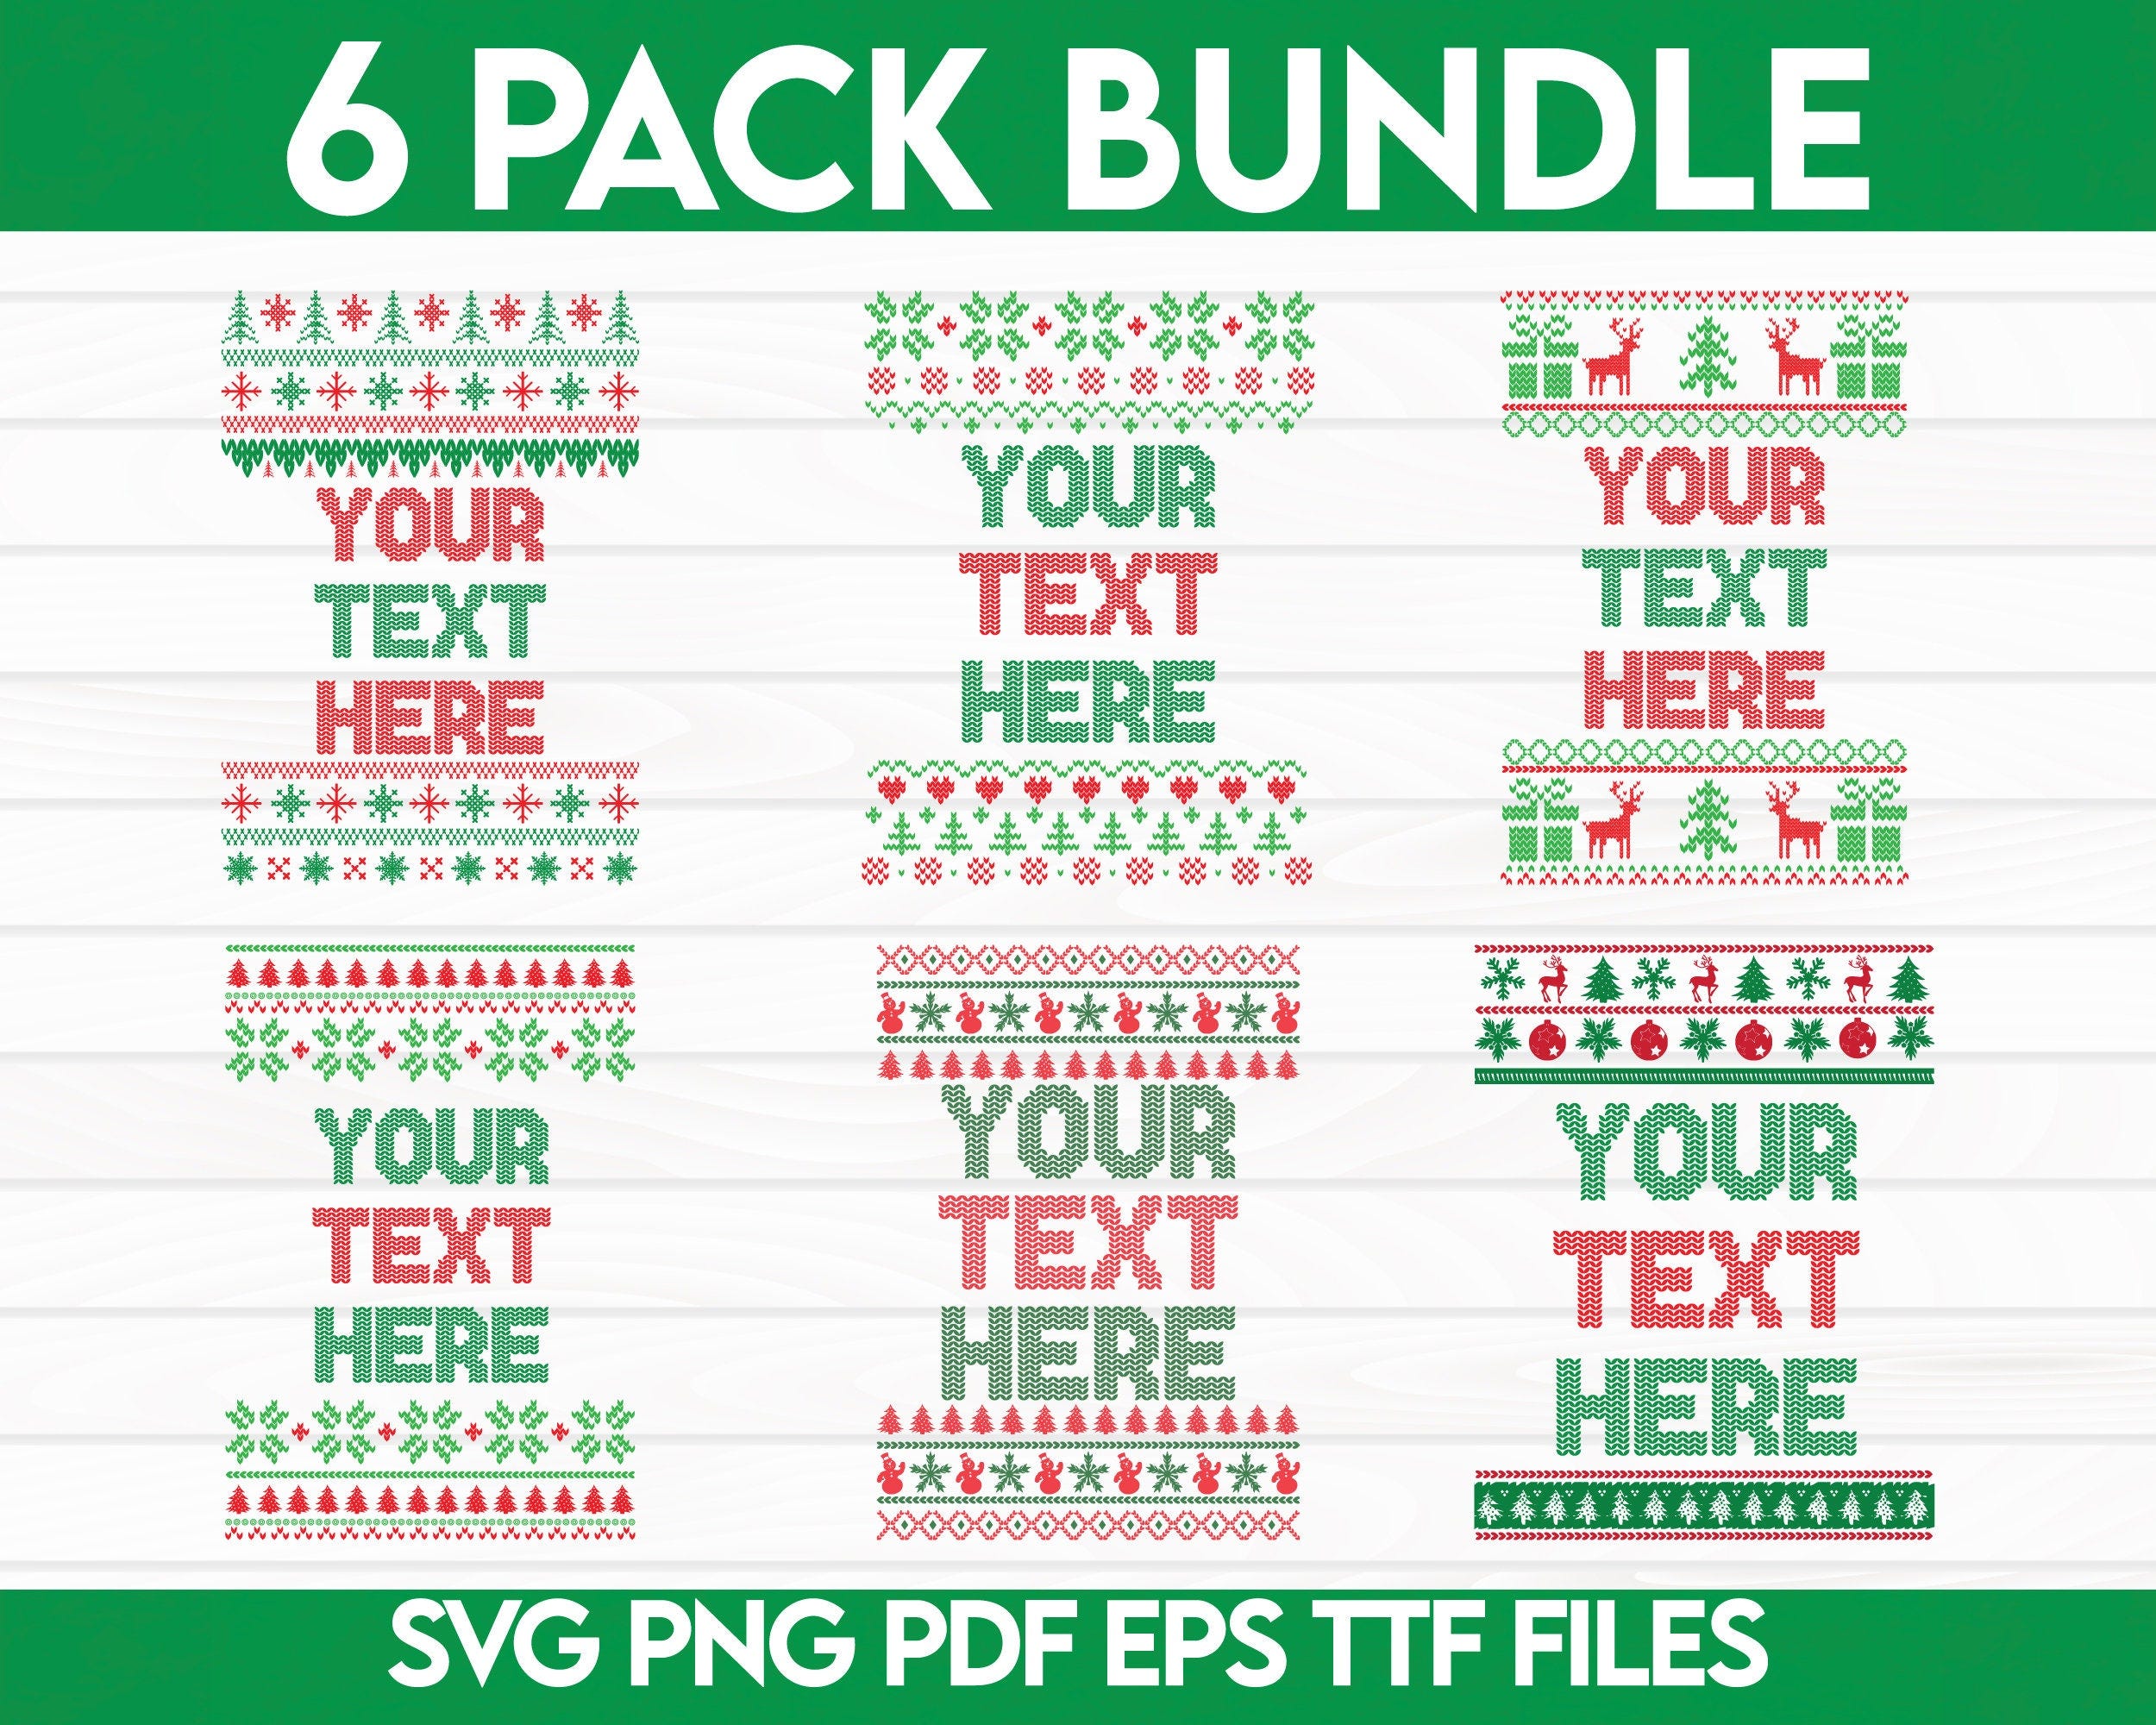 Ugly Christmas Sweater Svg, Christmas Sweater Bundle Svg, Ugly Sweater Svg Bundle, Ugly Sweater Svg, Ugly Sweater, Svg Files for Cricut